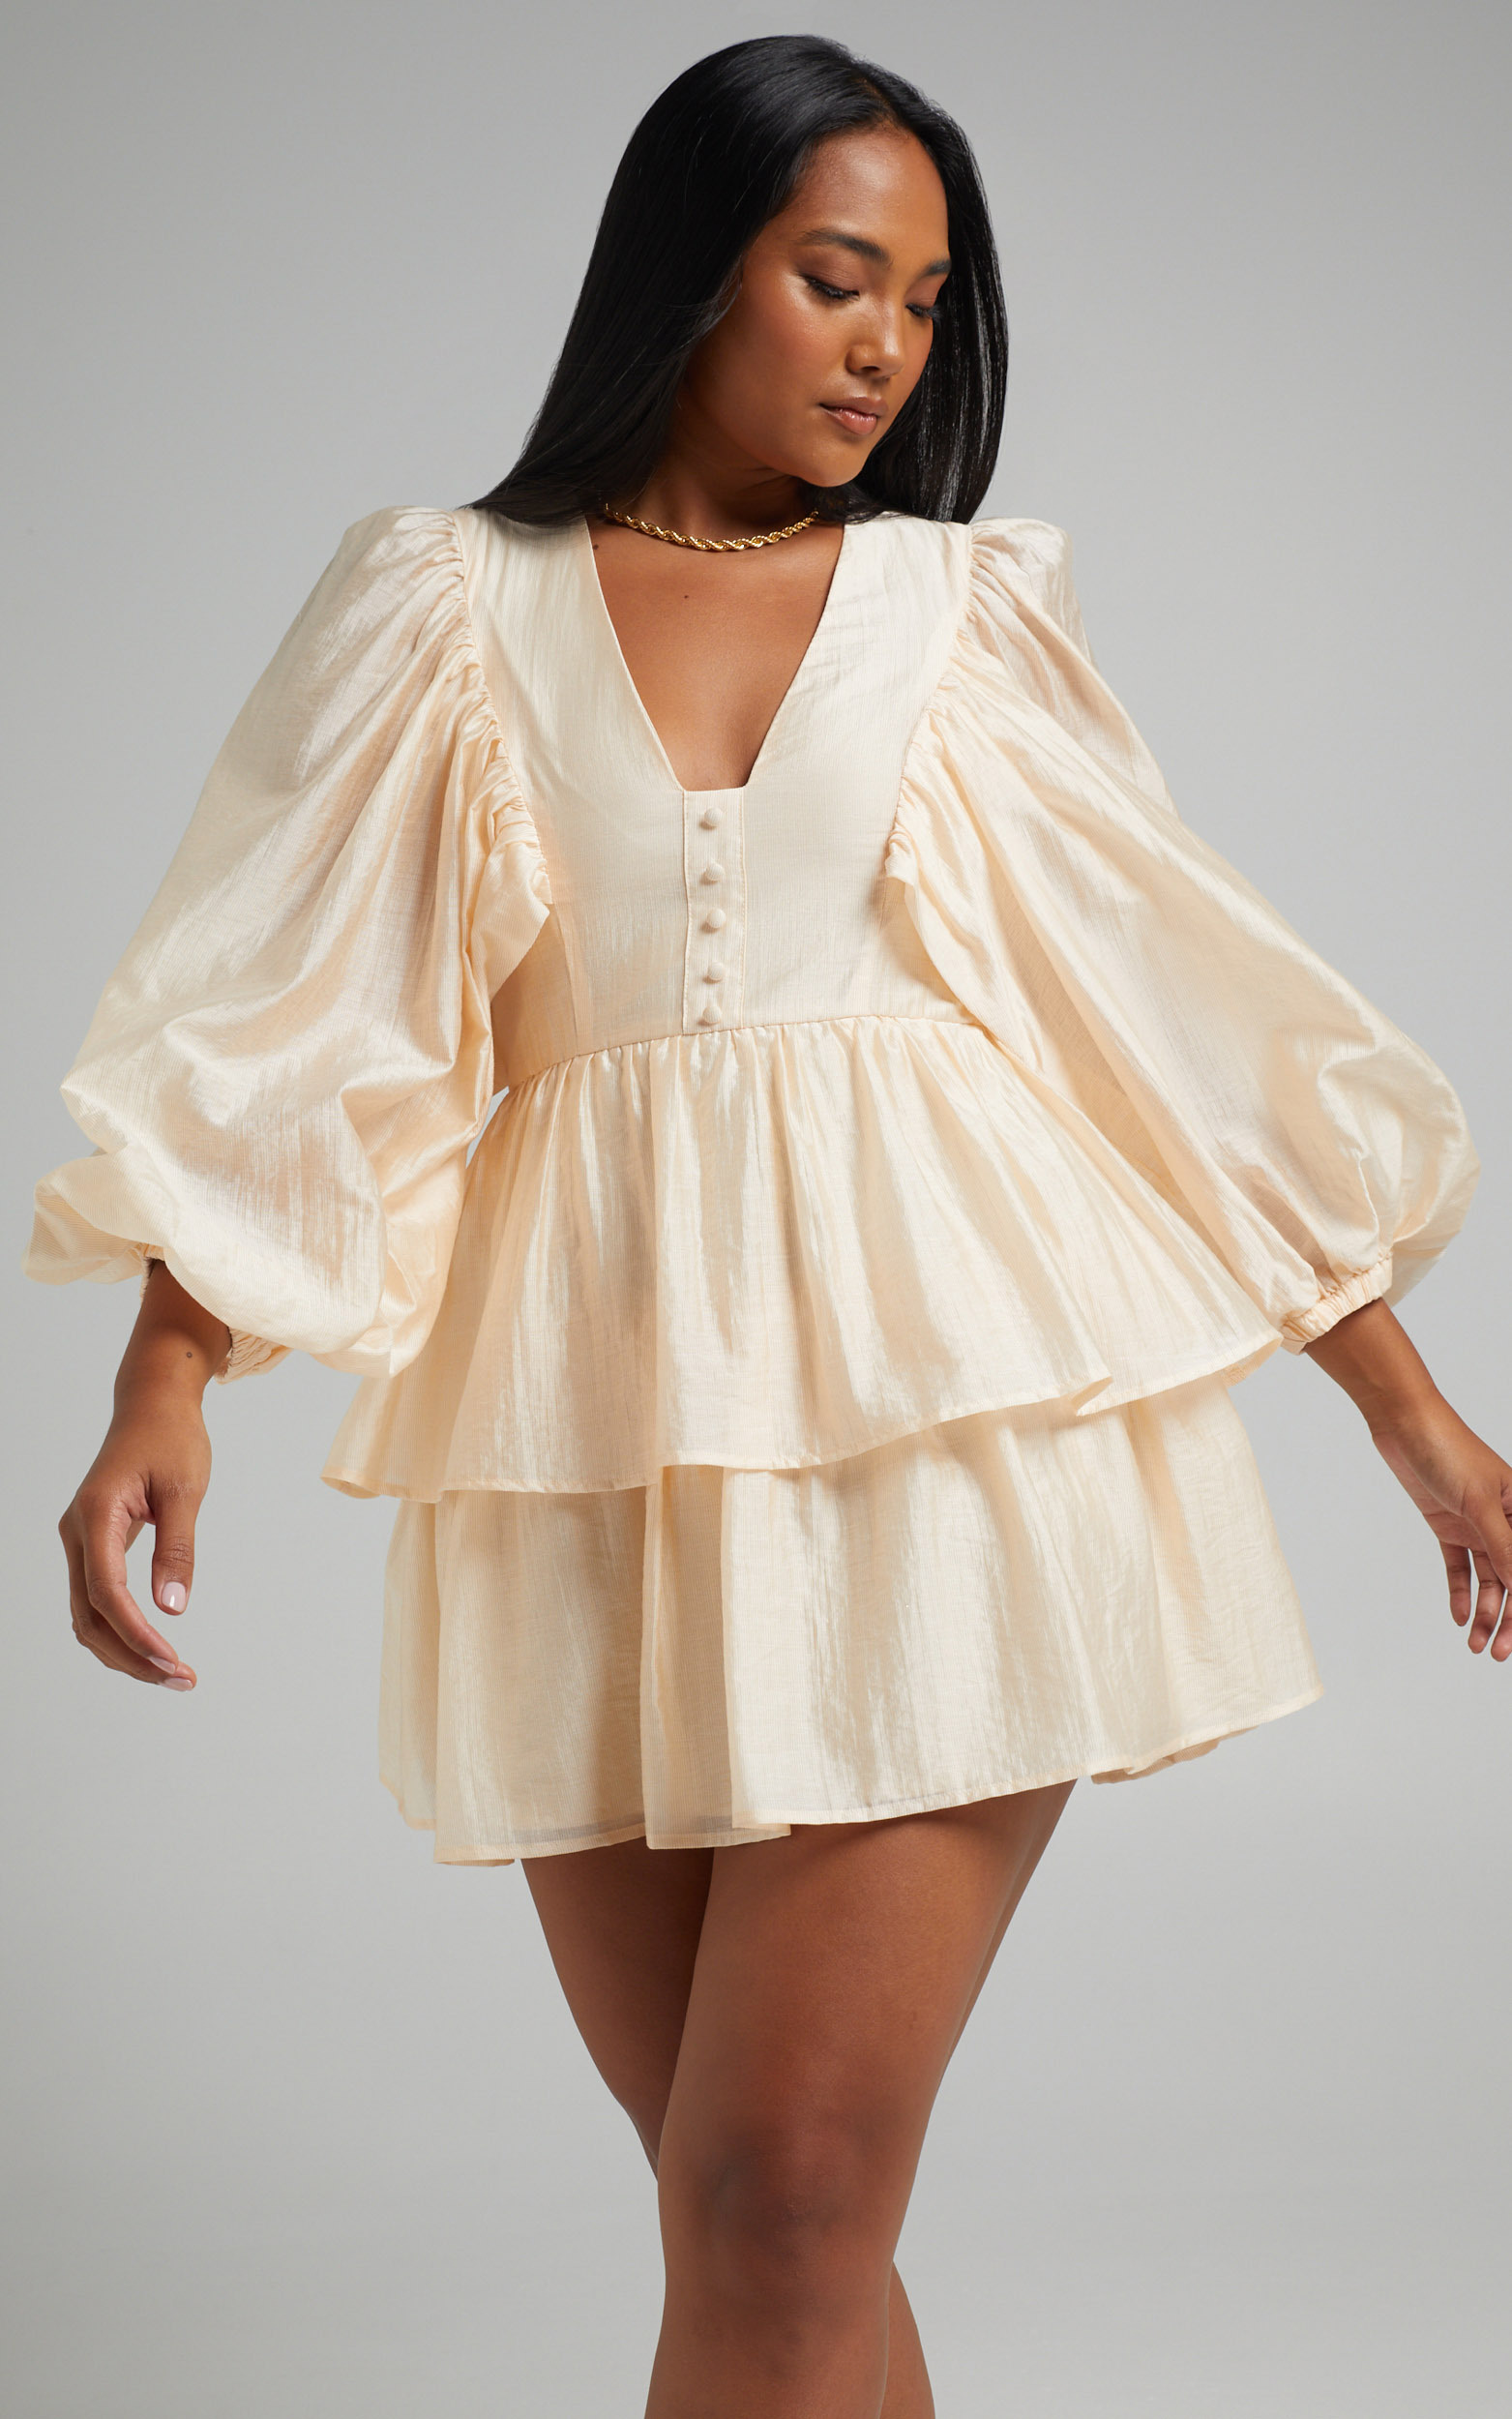 Constance Wide Sleeve Layered Mini Dress in Cream - 06, BRN3, hi-res image number null